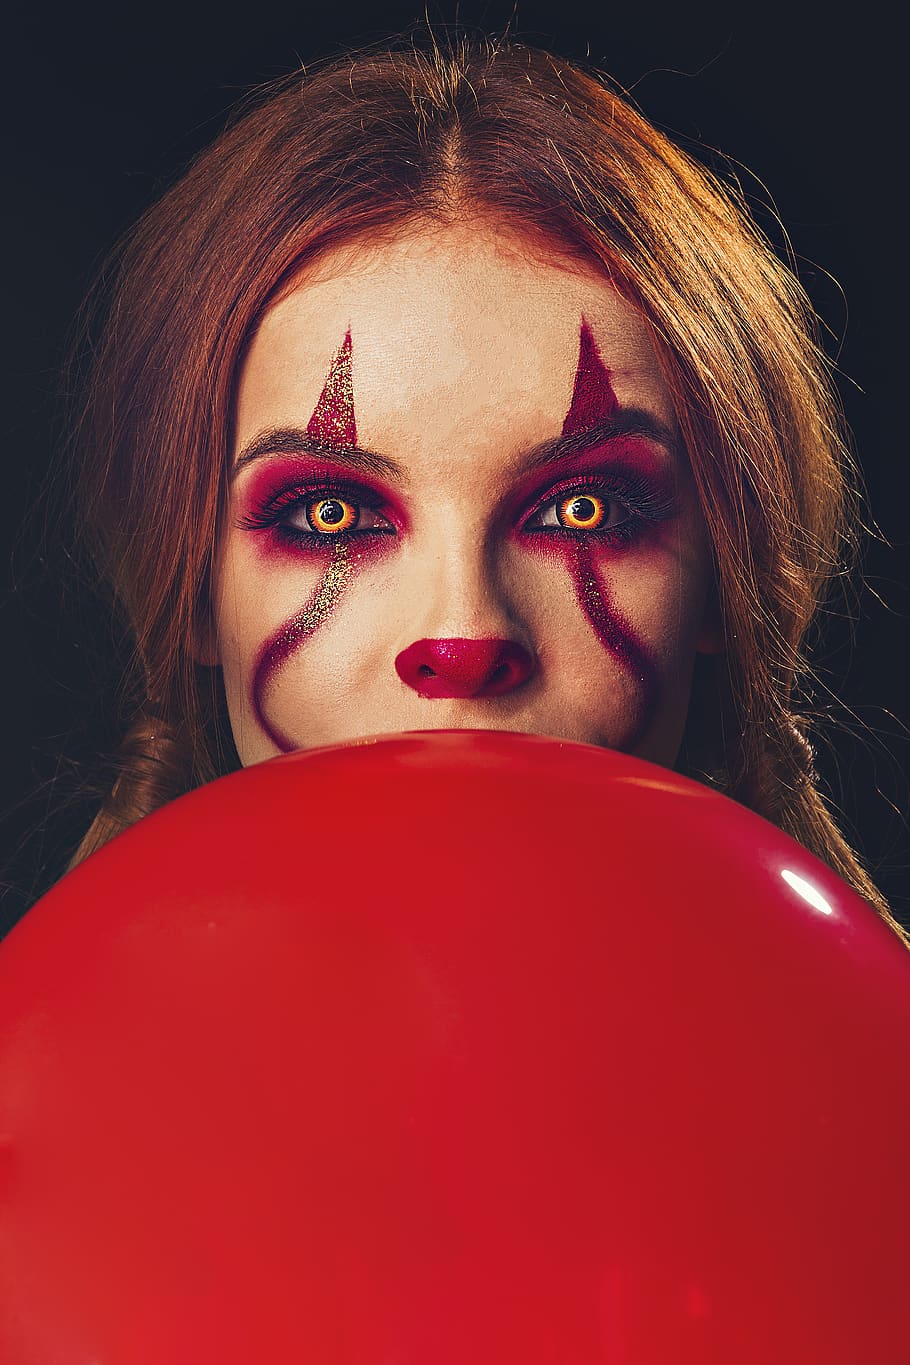 Woman With Face Paint, adult, art, balloon, beautiful, clown